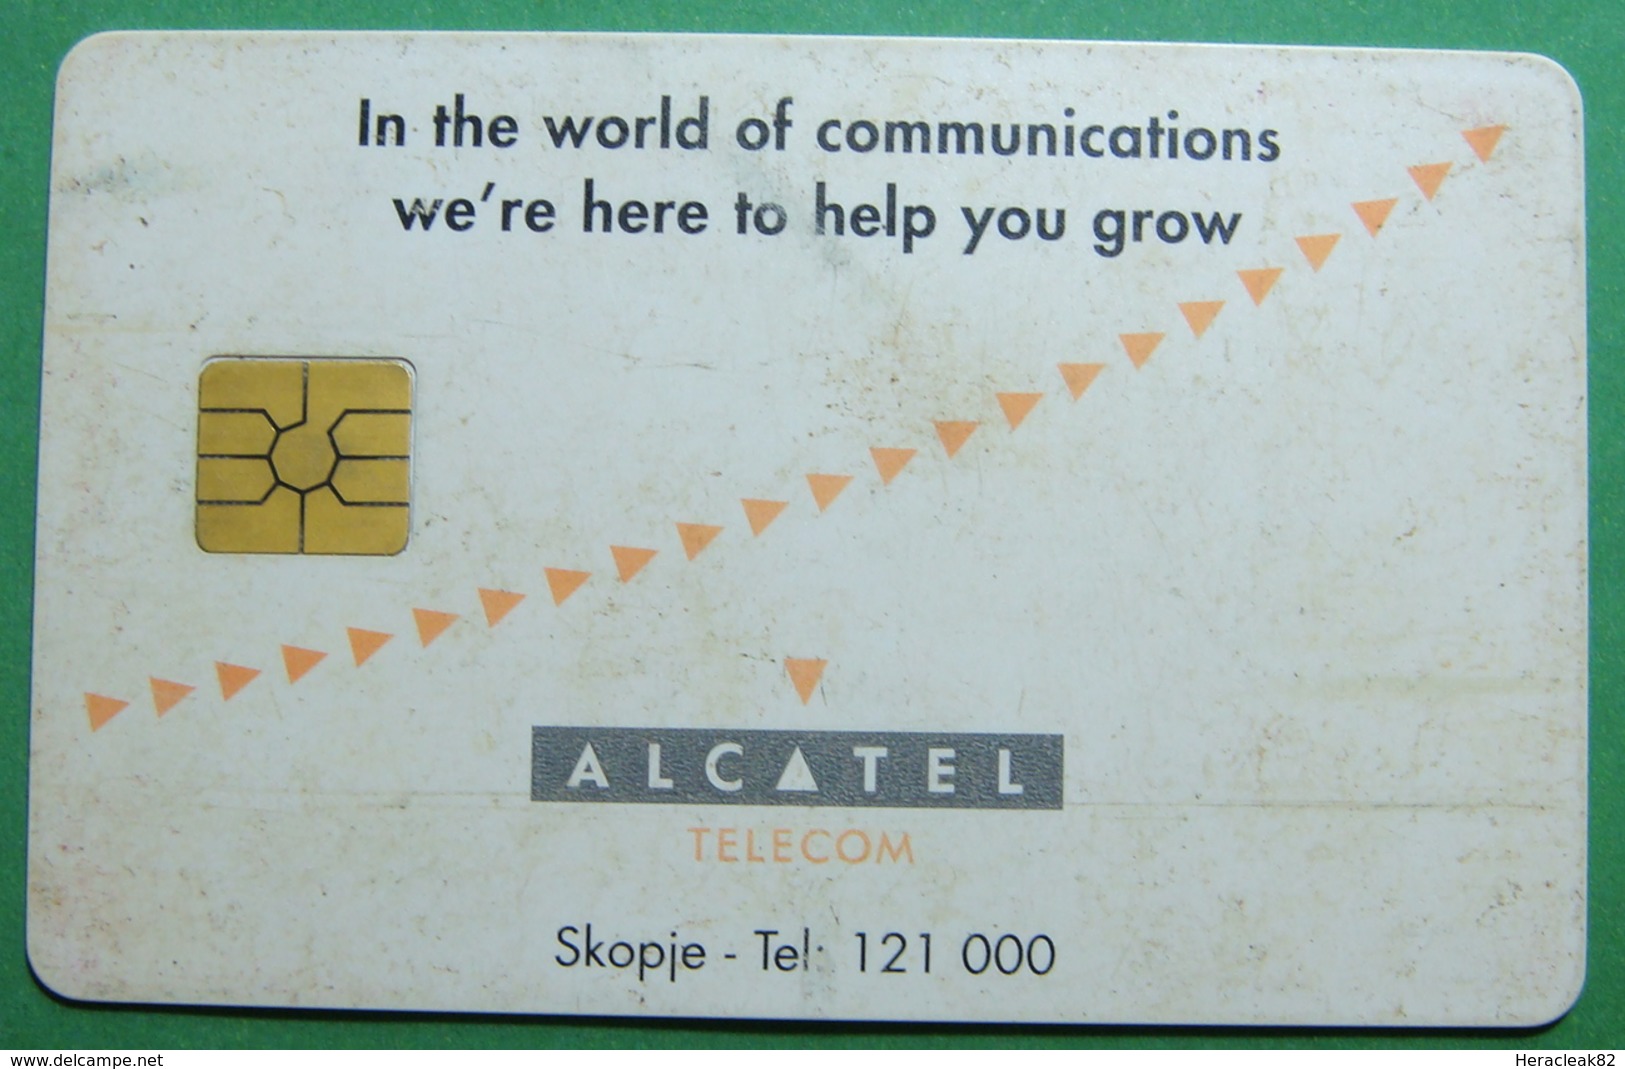 Macedonia CHIP PHONE CARD USED, Operator: Mobimak, Without Value *ALCATEL* RARE - Macedonia Del Nord